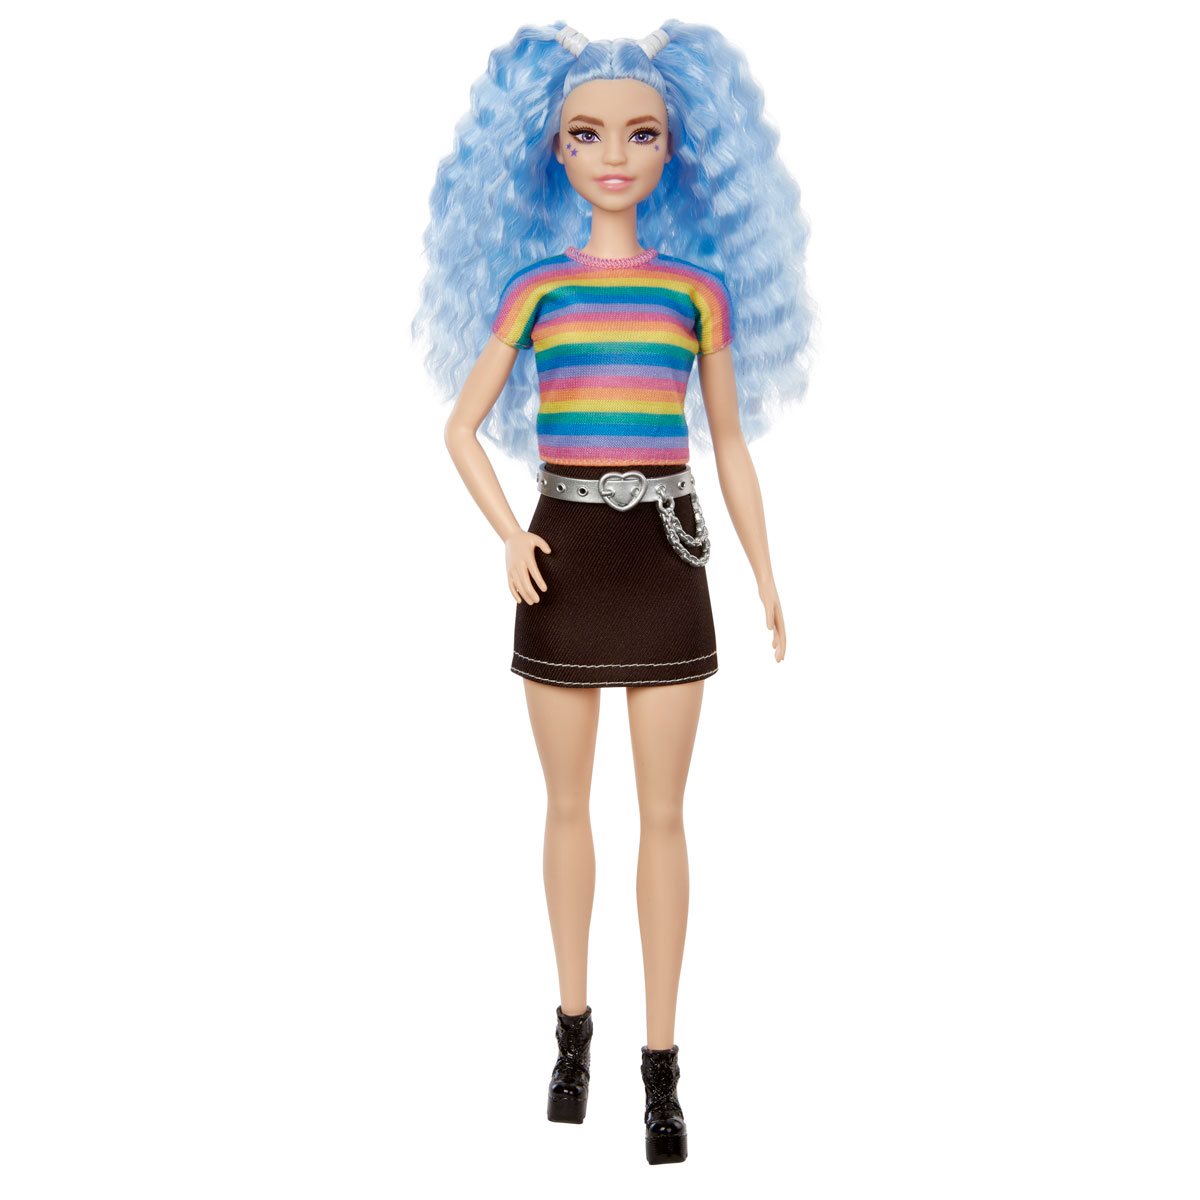 fedme Poesi Anerkendelse Barbie Fashionistas Doll #170 with Blue Hair